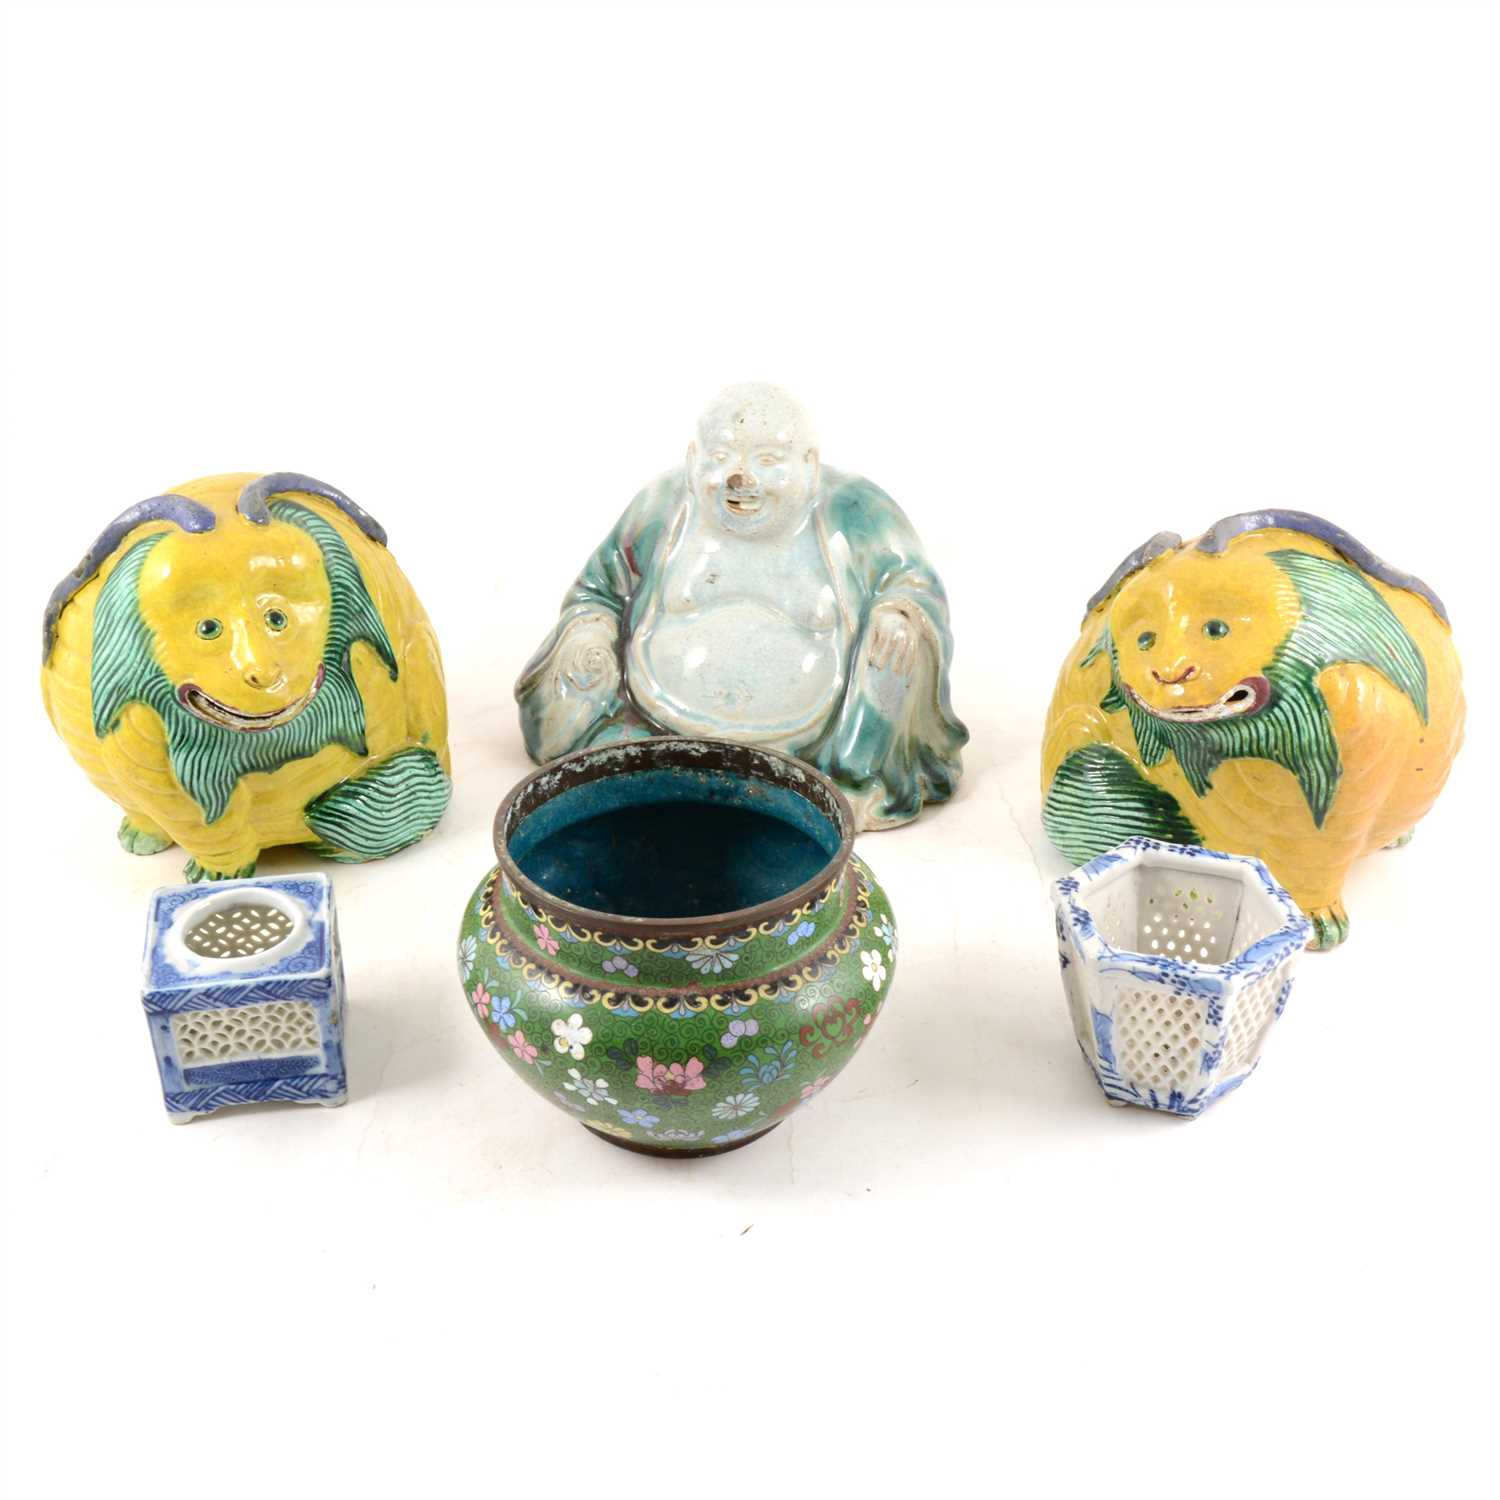 Lot 42 - Cloisonné jardinière and two additional cloisonné vases and other Asian items